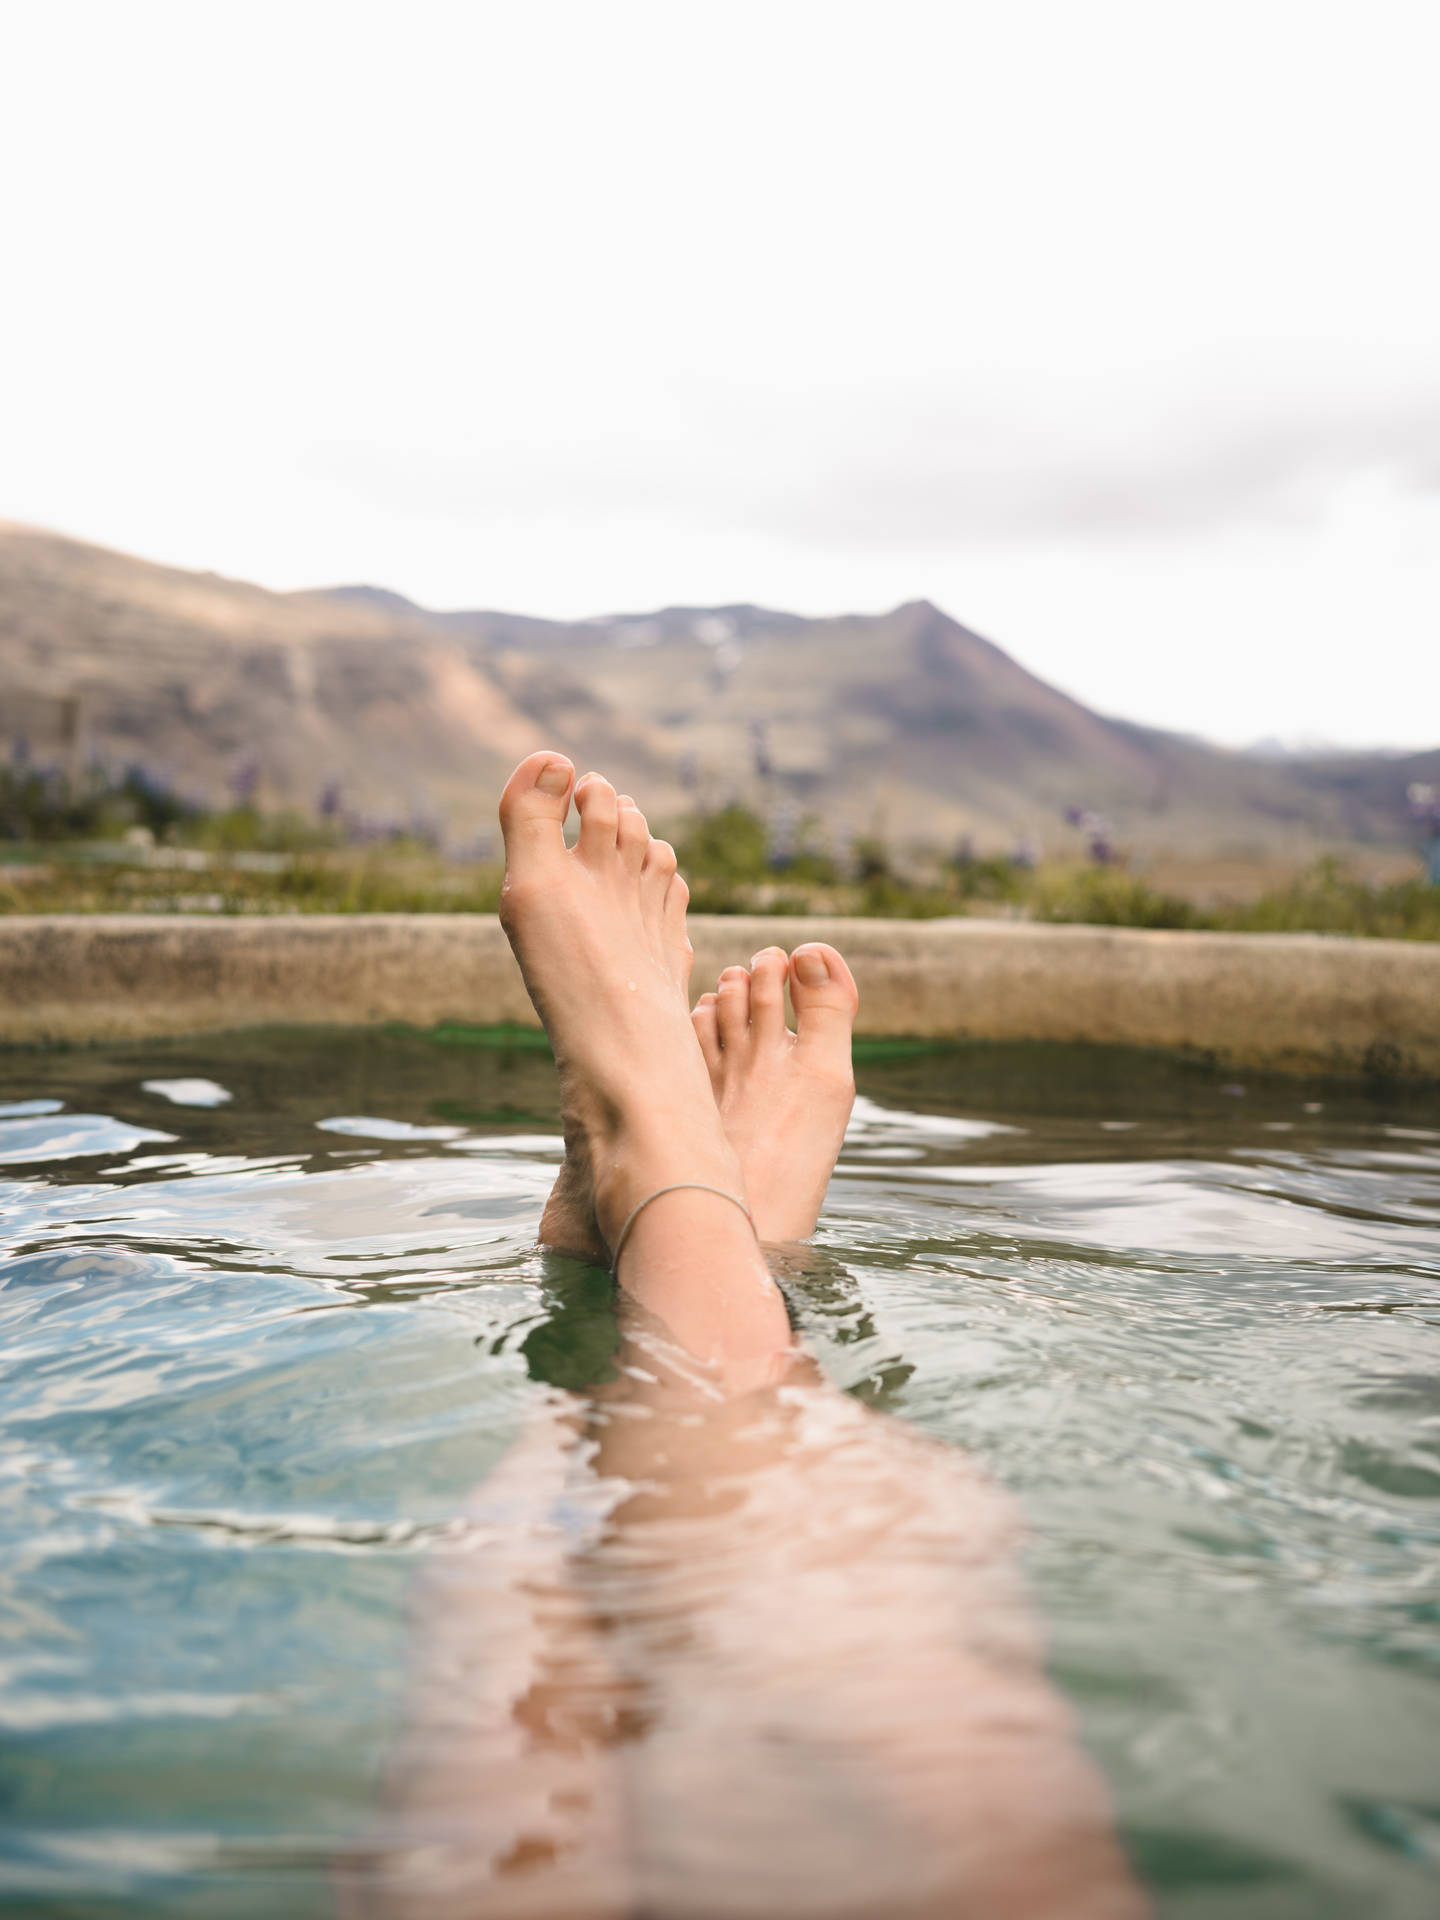 Relaxing Summer Days - Feet Floating in a Pool Wallpaper